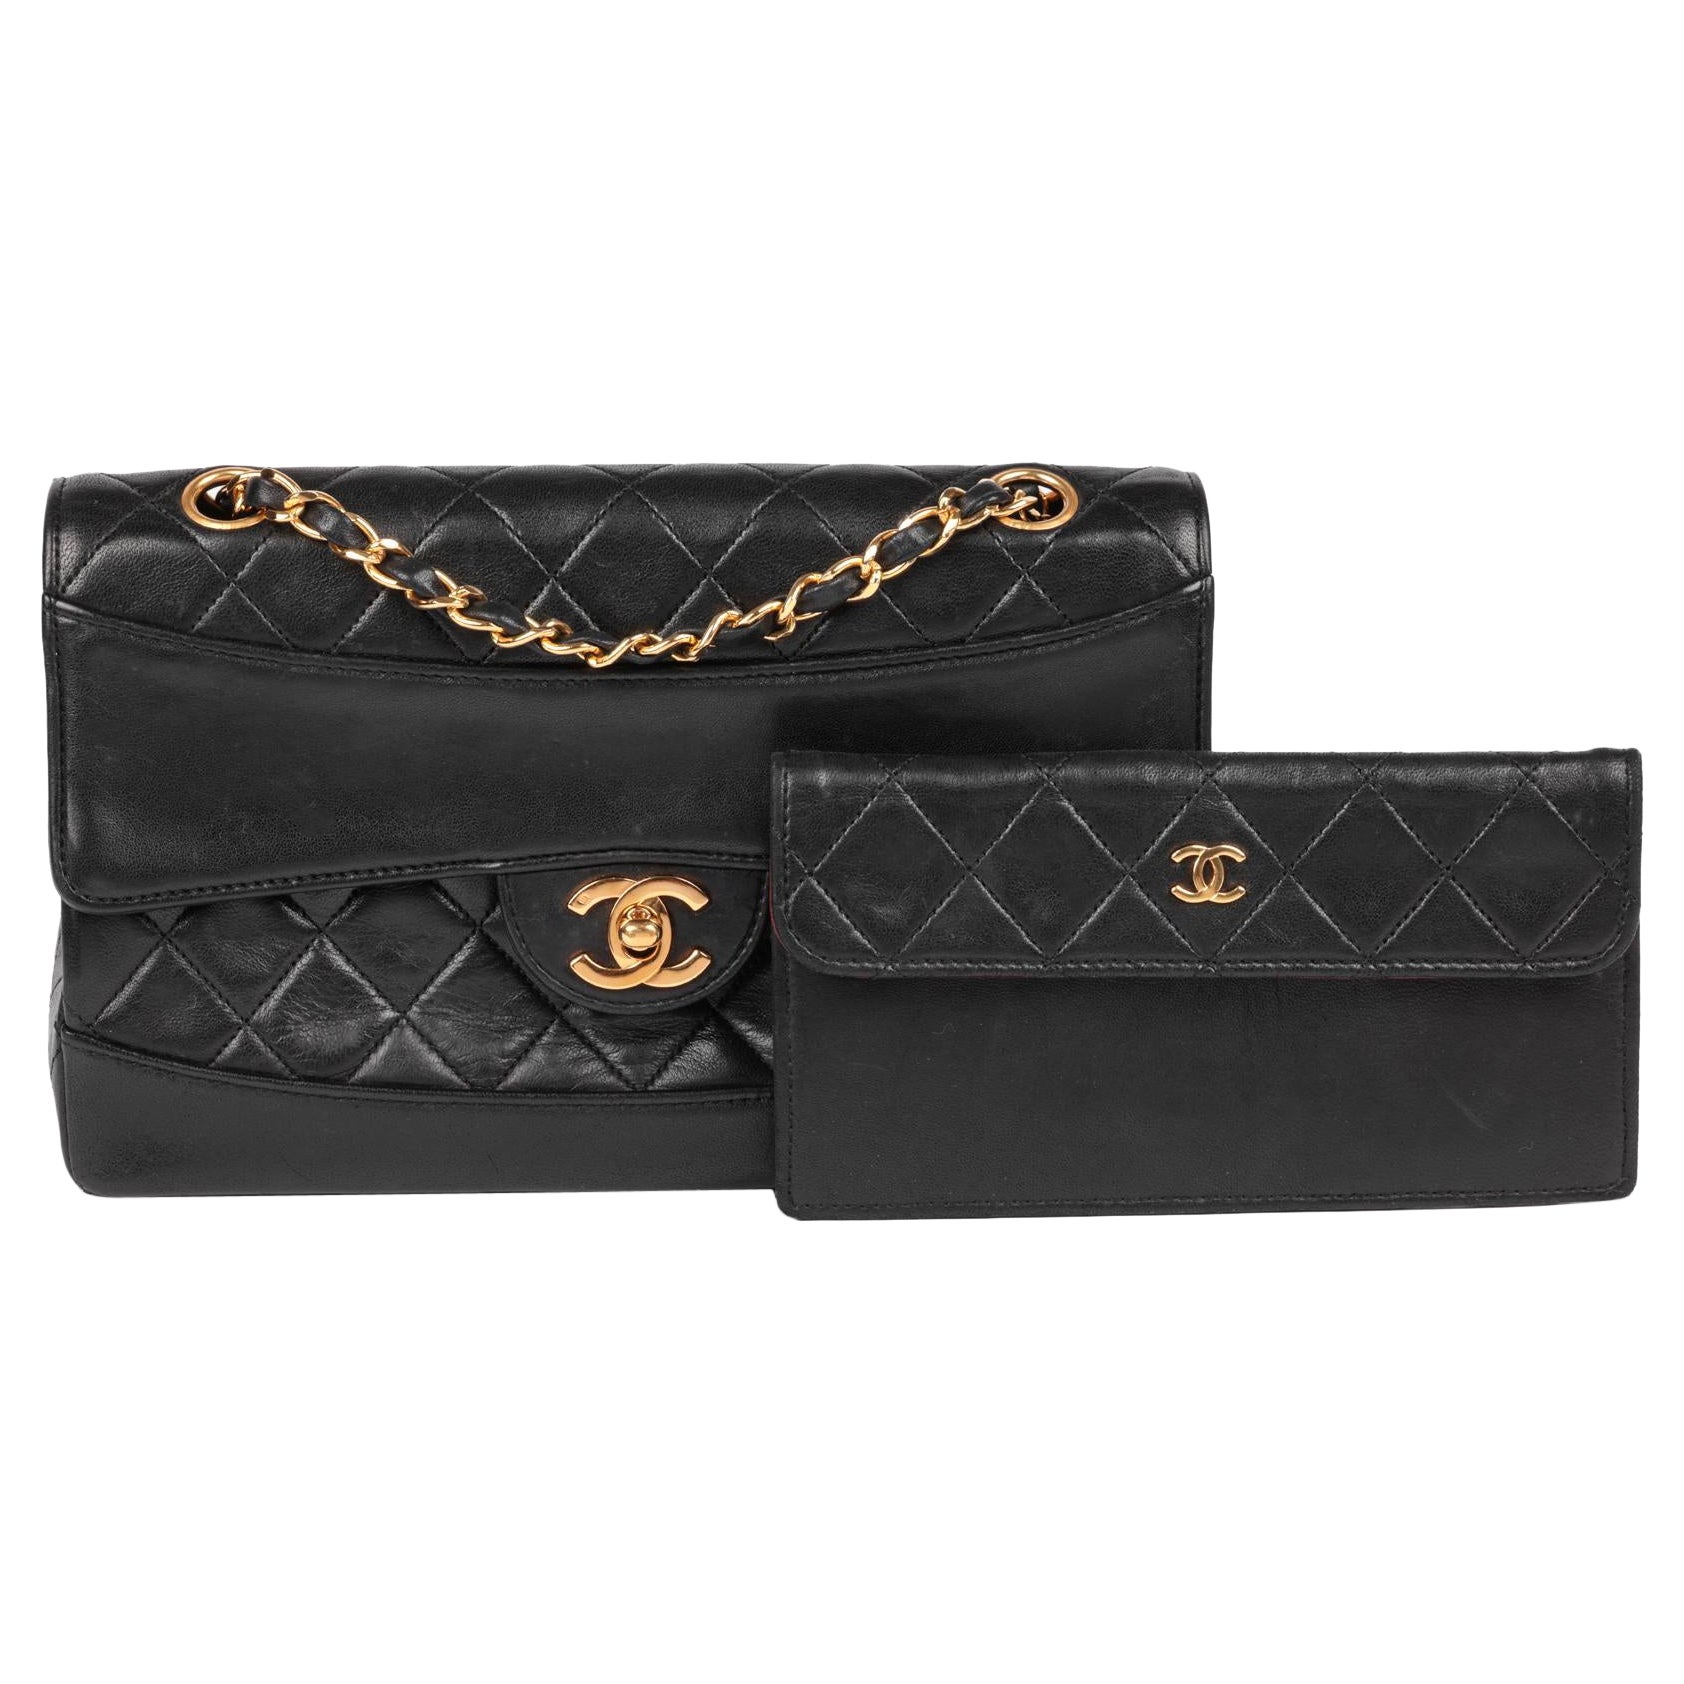 CHANEL Black Quilted Lambskin Vintage Medium Classic Single Flap